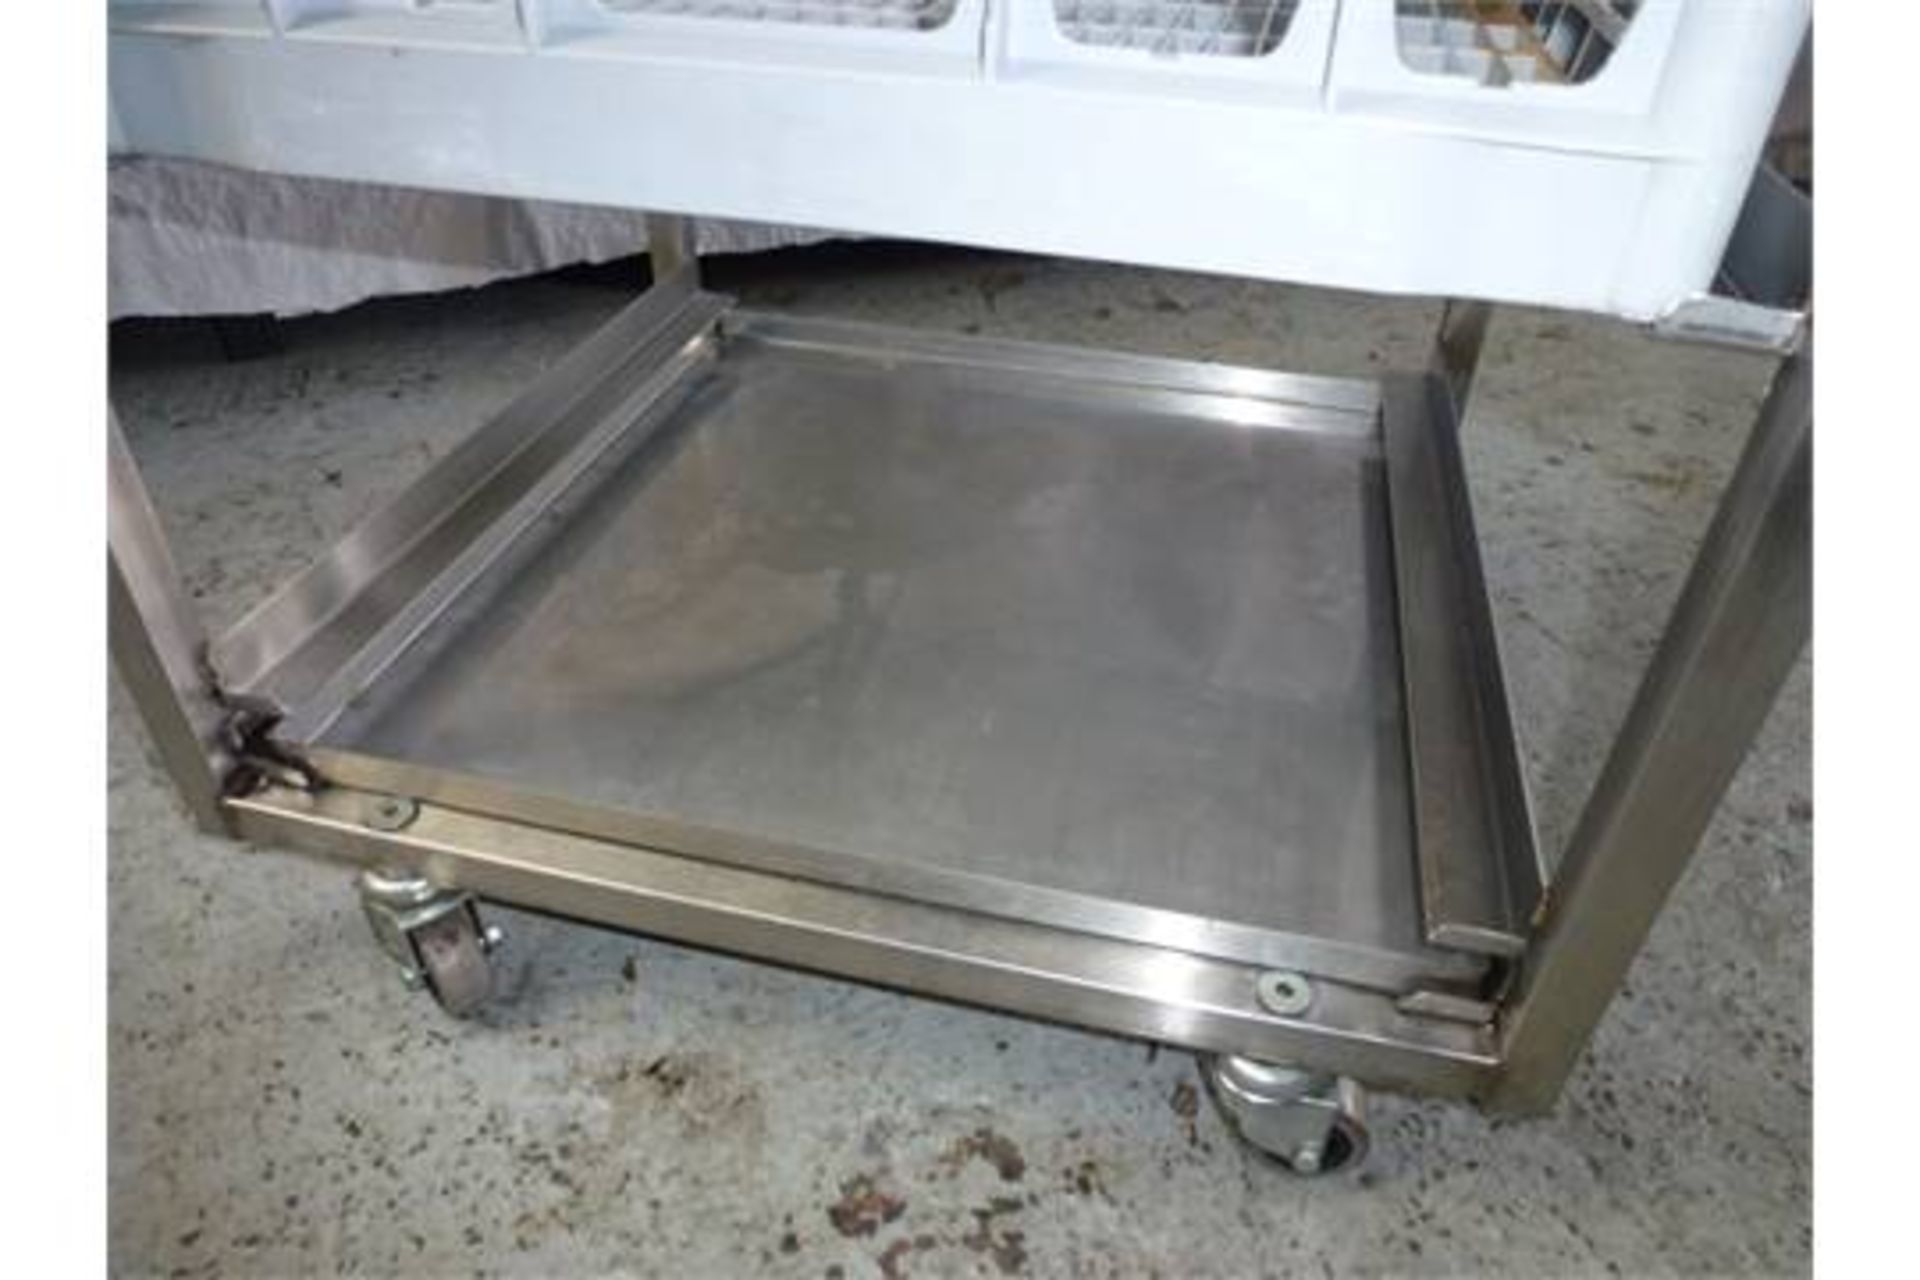 1 x Stainless Steel Pint Glass Pot Collector Trolly - 3 Tier Trolley With Removable Trays, Drip Tray - Image 5 of 6